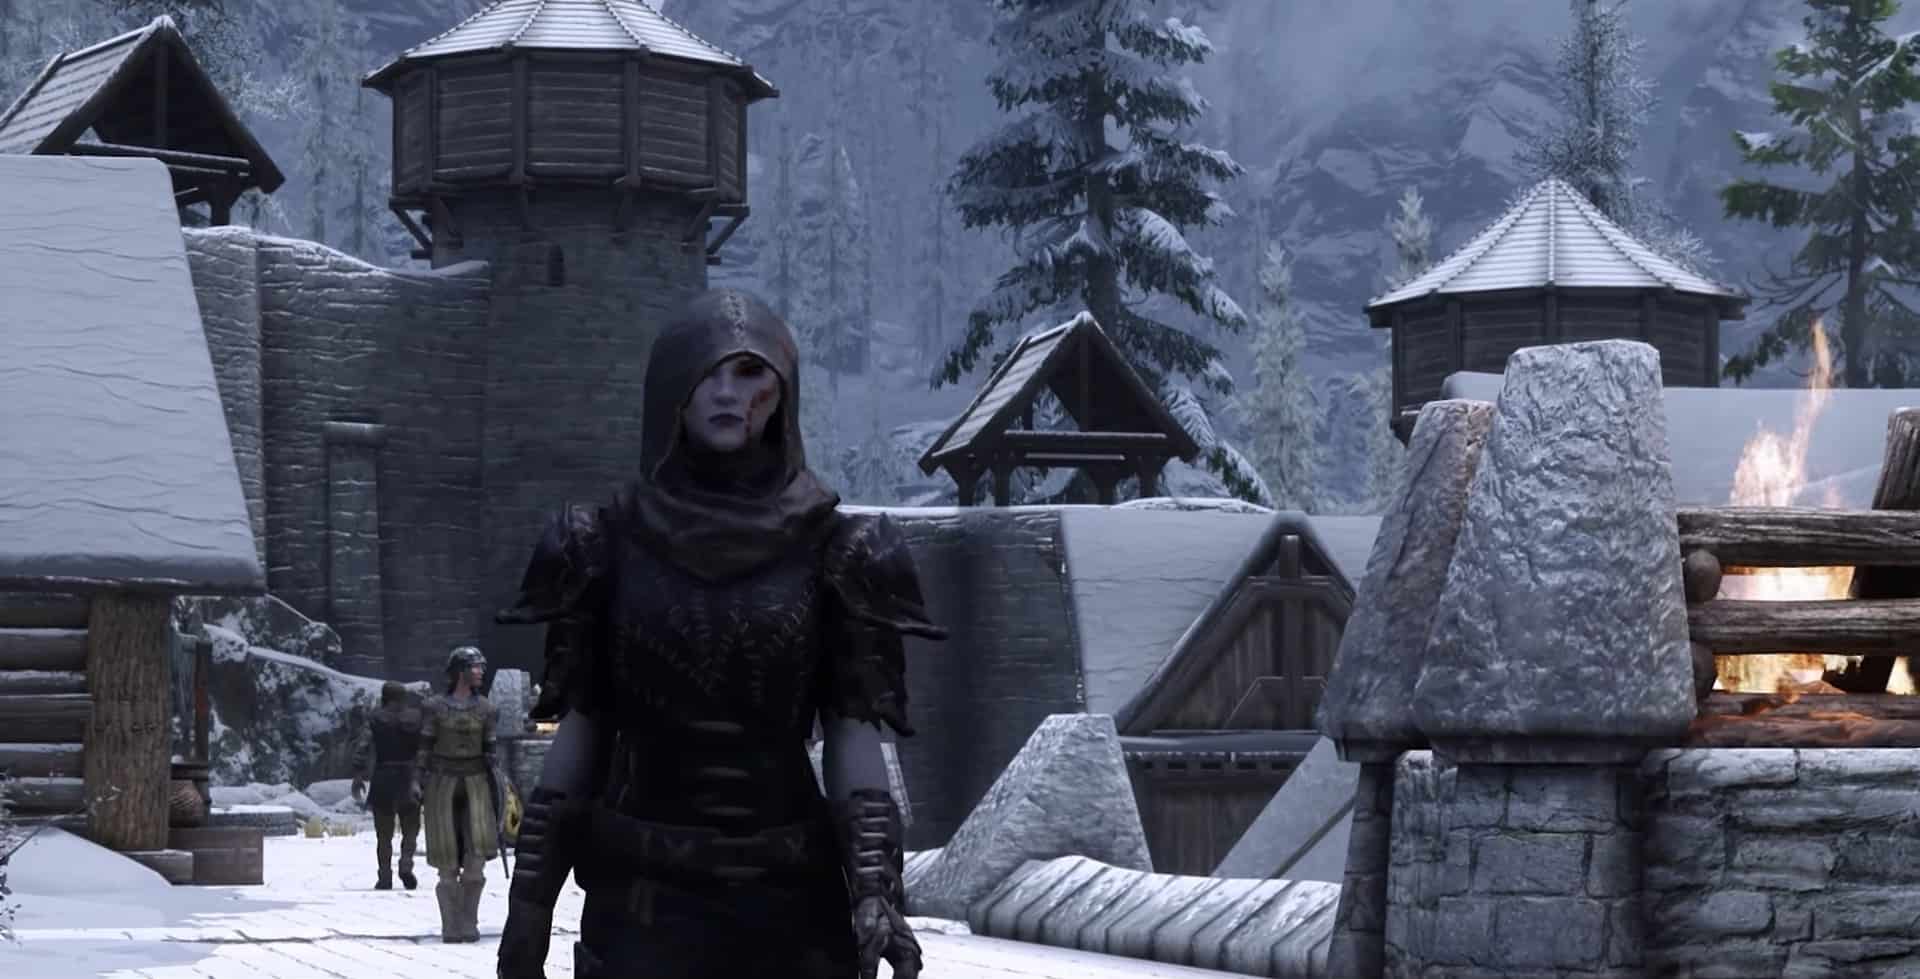 skyrim stealth armor and weapons featured